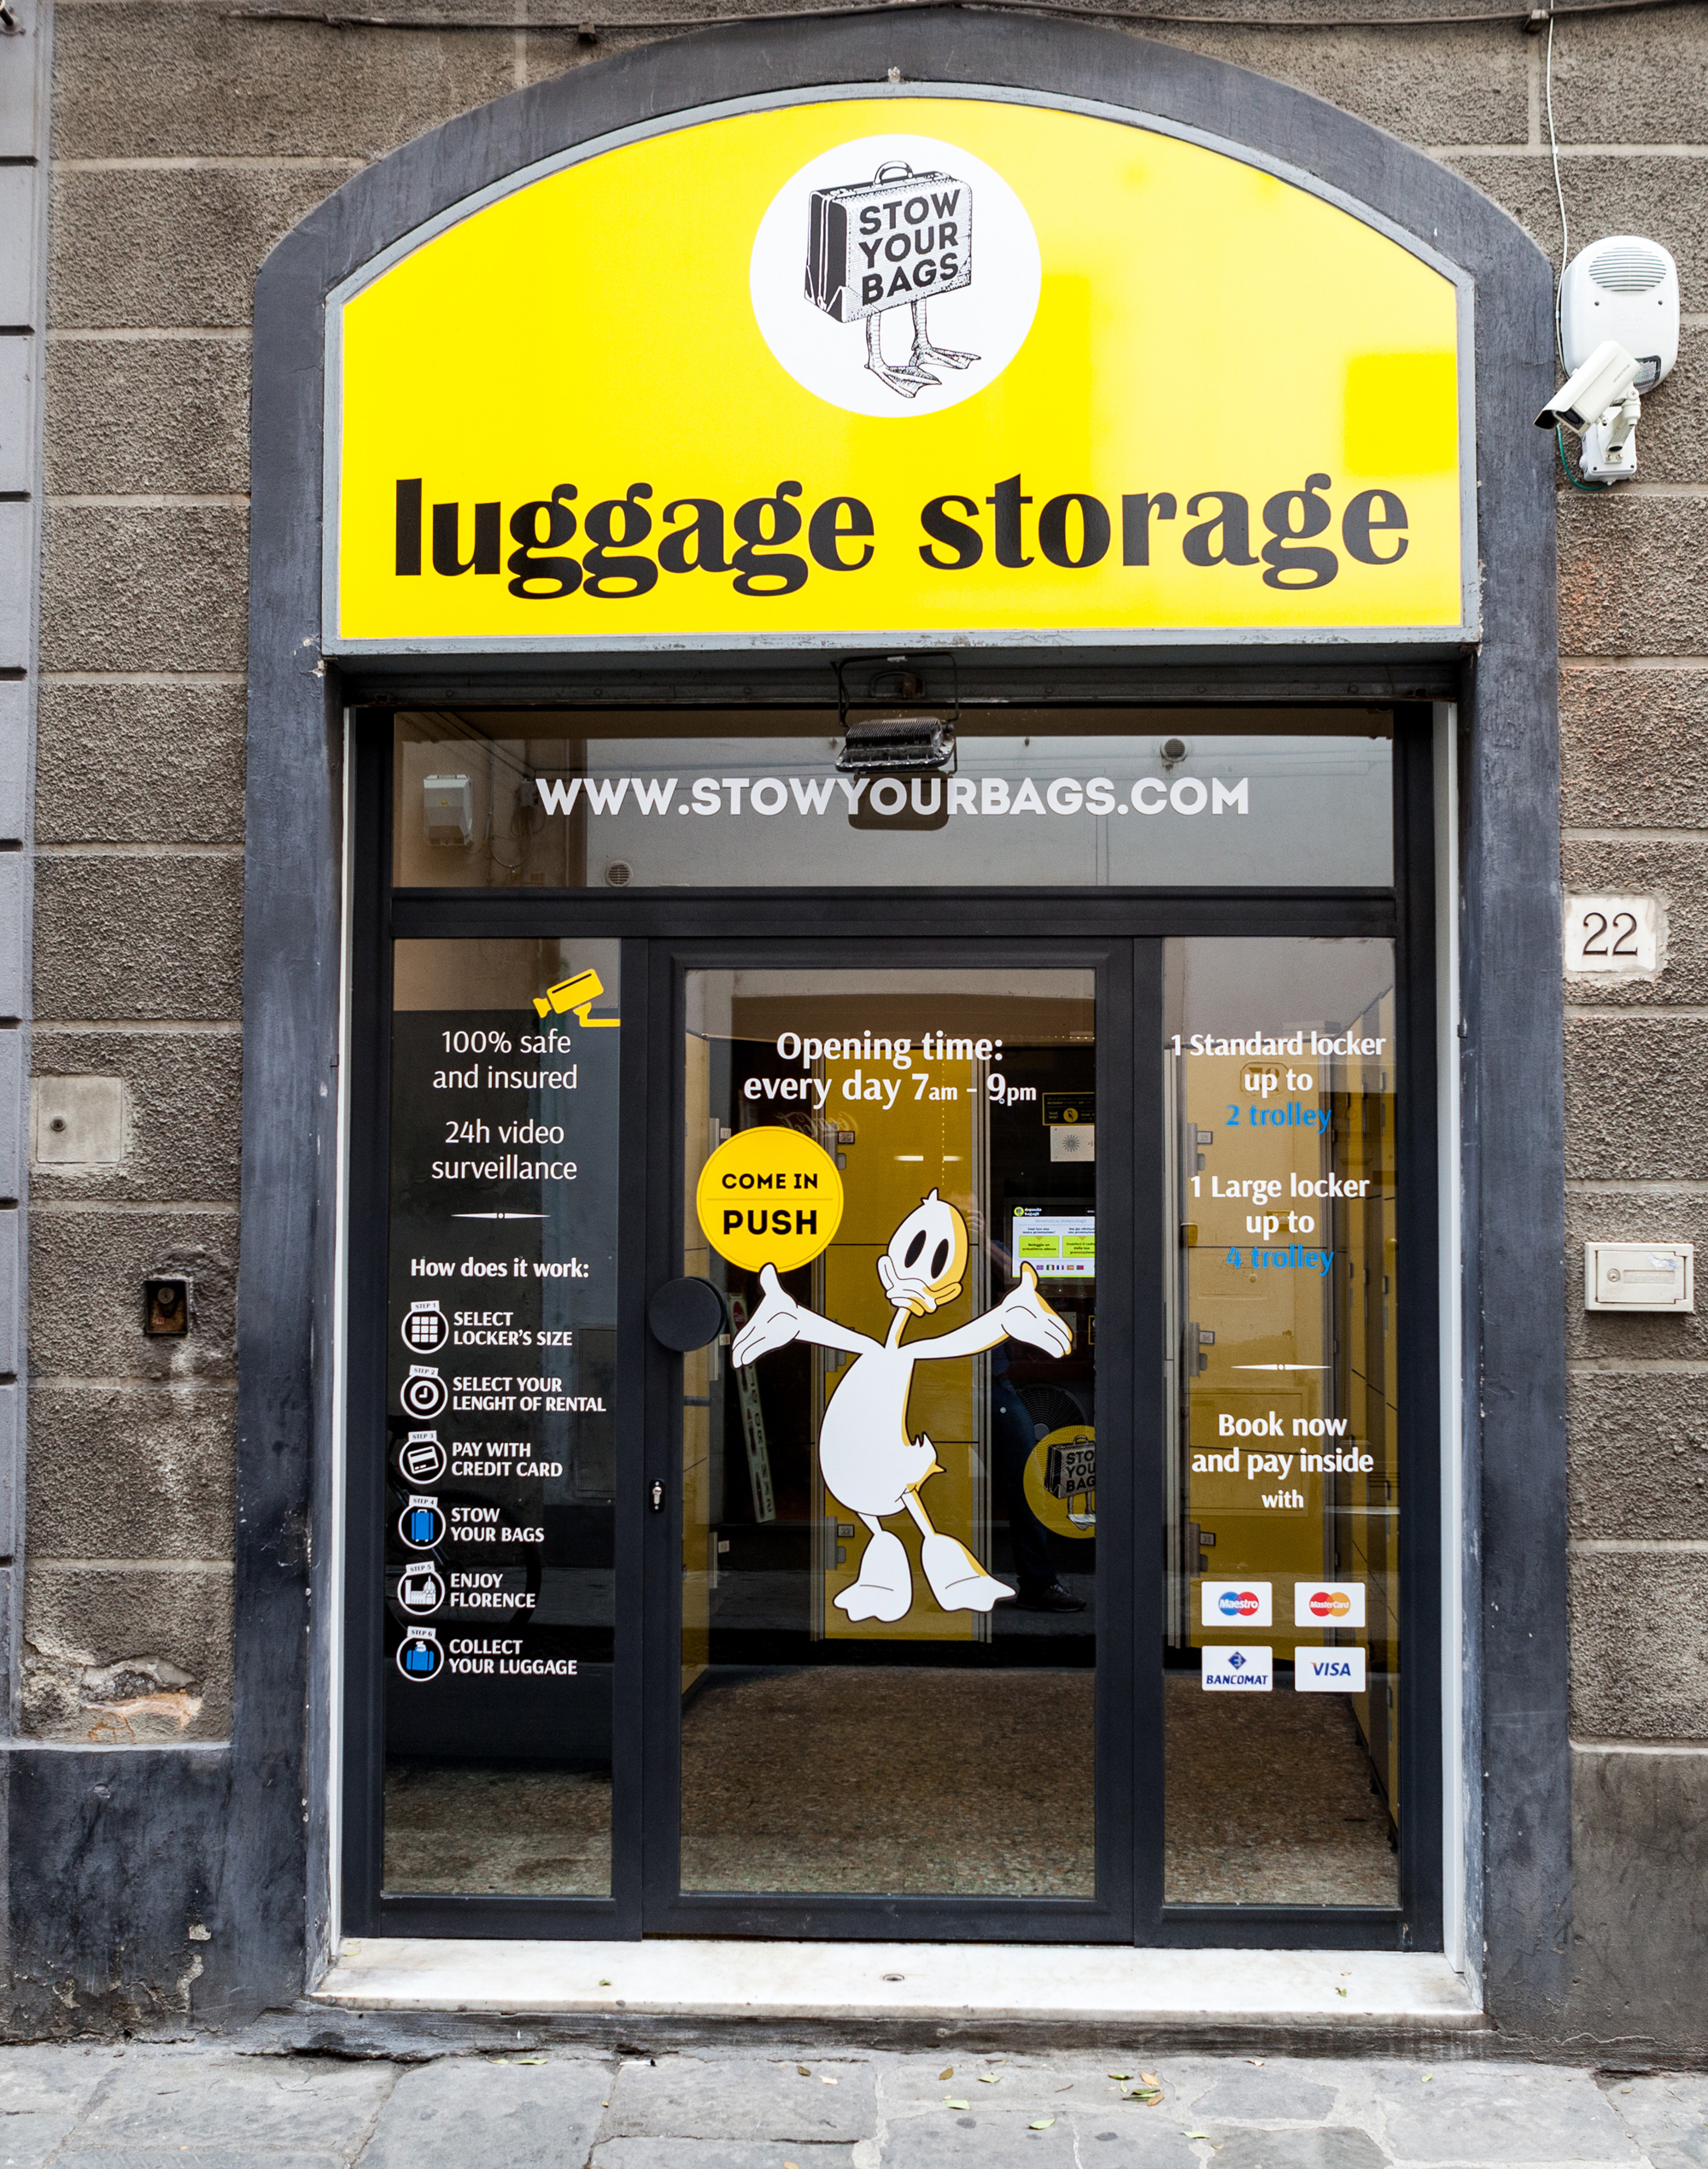 Stow Your Bags  Luggage Storage   IMPORTANT NOTICE  Due to the  COVID19 virus emergency our luggage storage in Malta will remain closed  until further notice We apologize for the